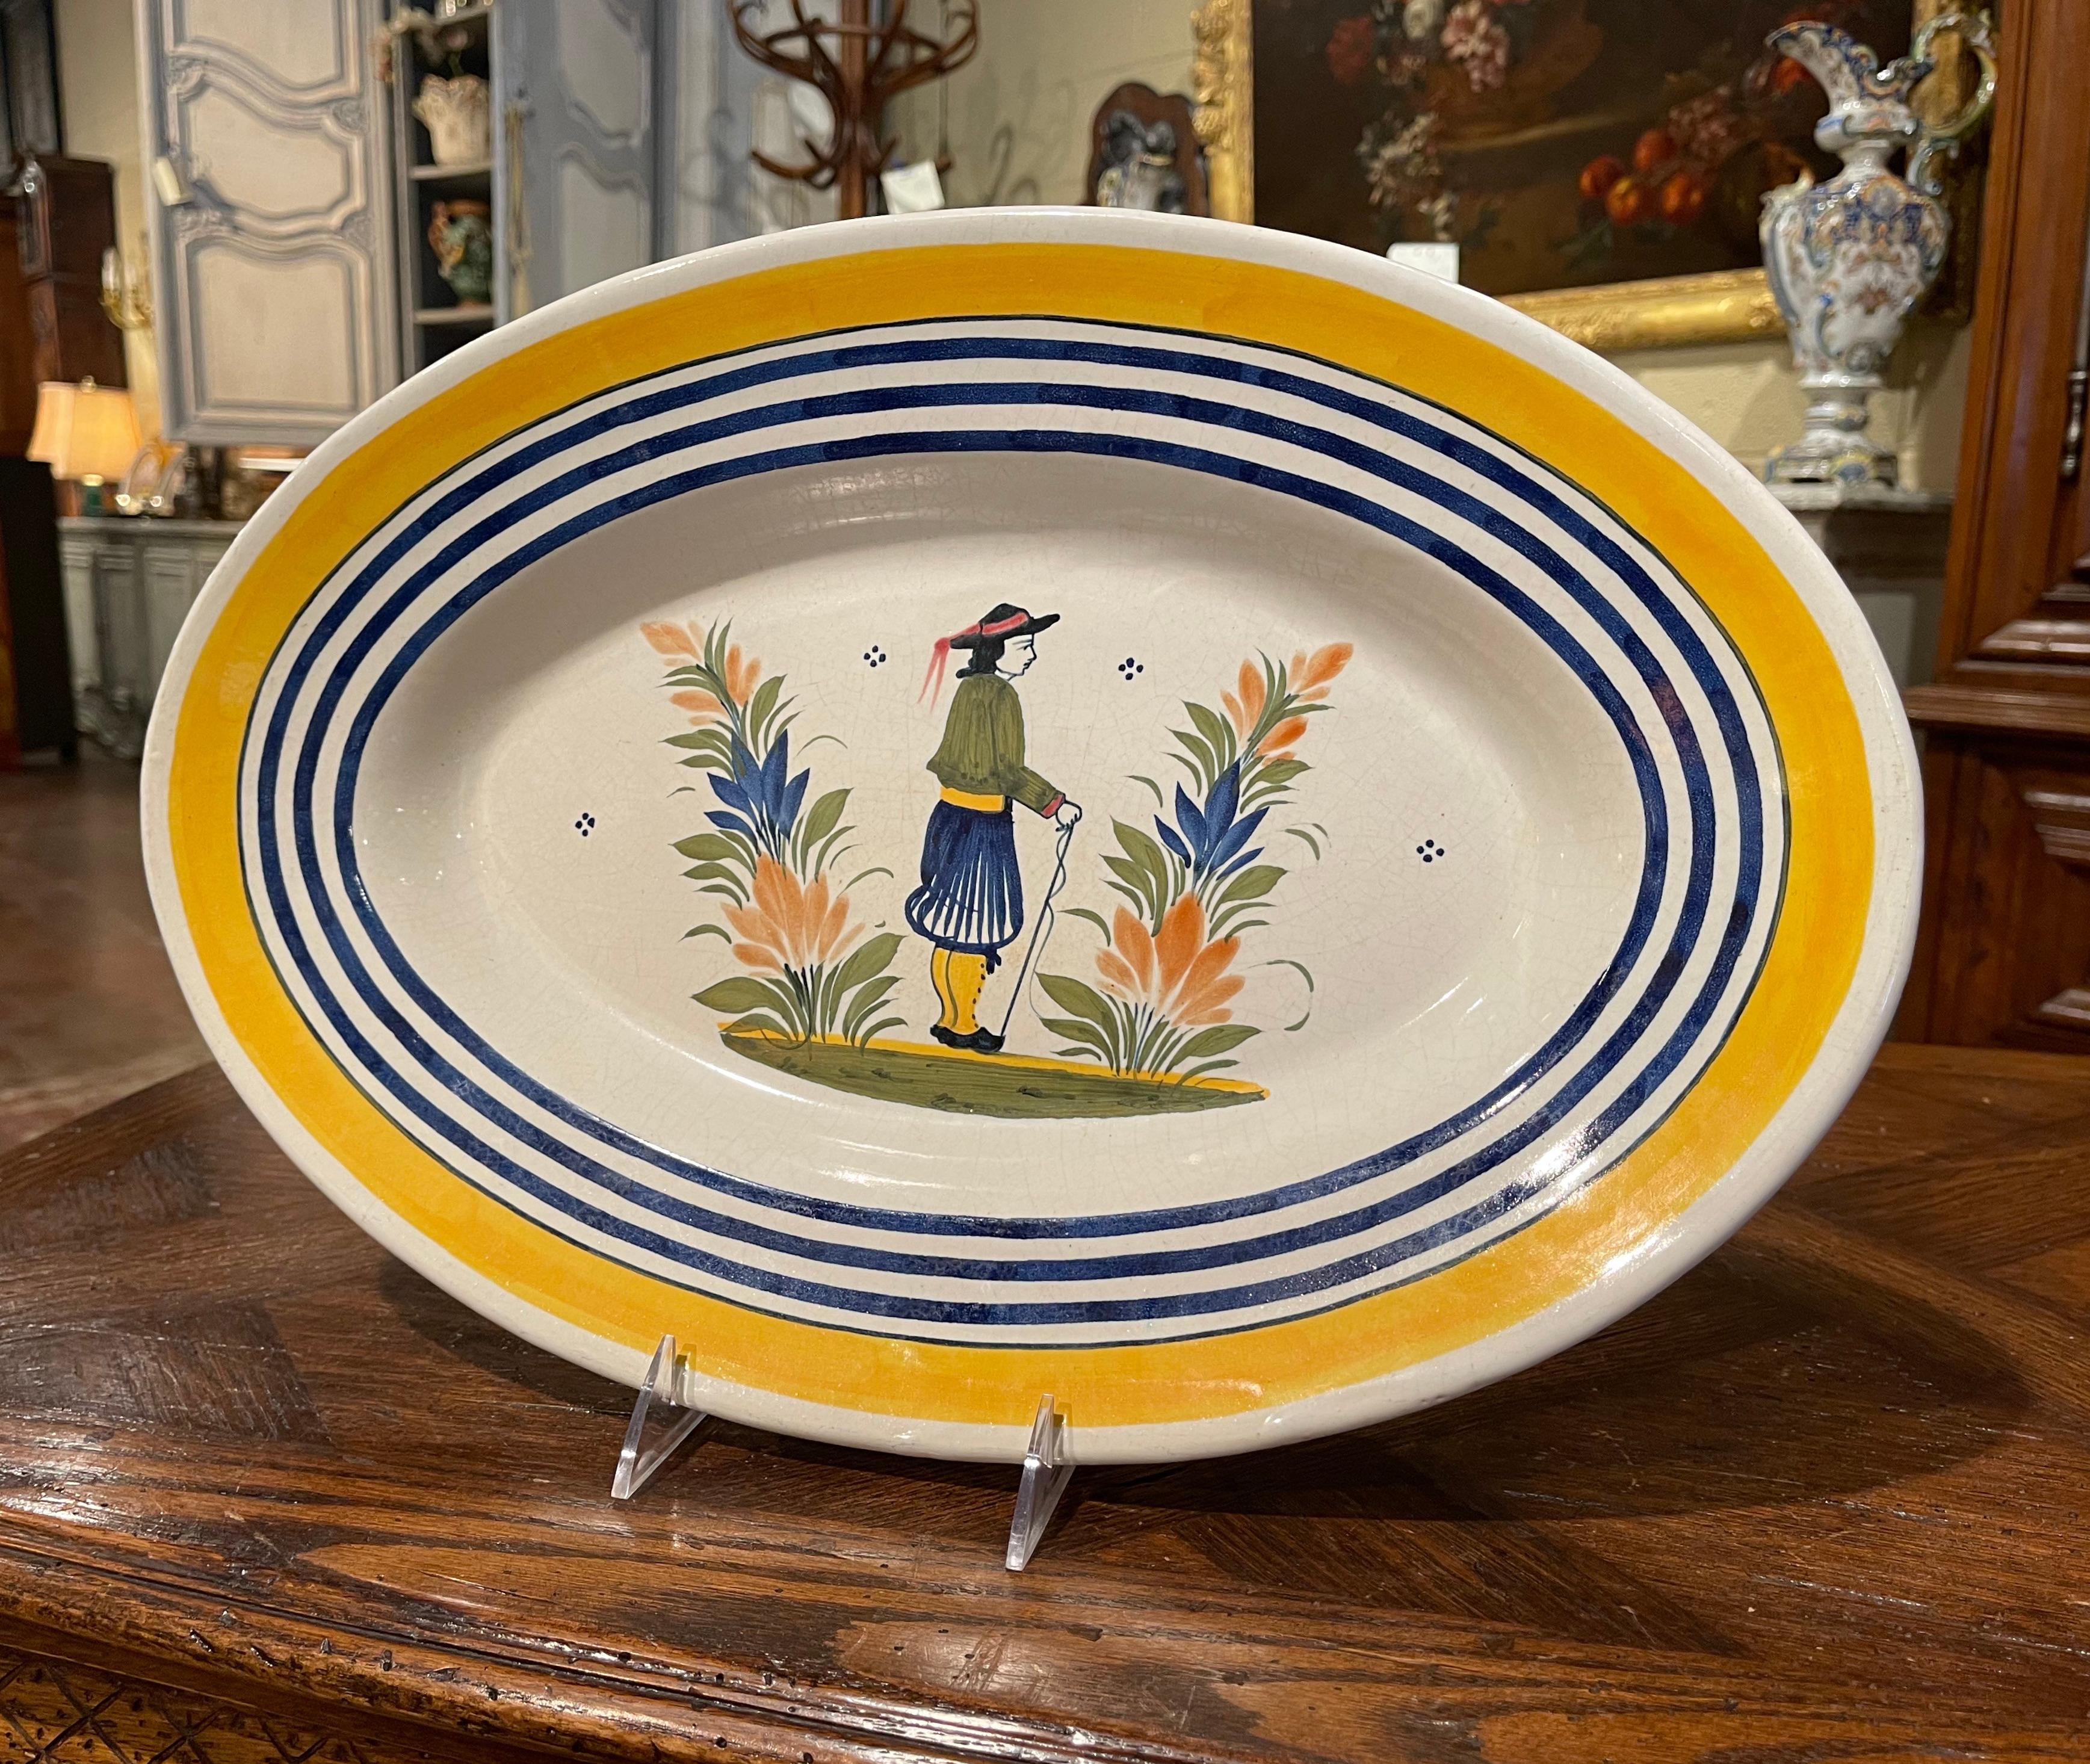 Decorate a kitchen wall or a shelf with this colorful antique decorative plate. Crafted in Brittany, circa 1920, the oval faience plate is hand painted with traditional Breton figure and foliage motif, further embellished with blue and yellow